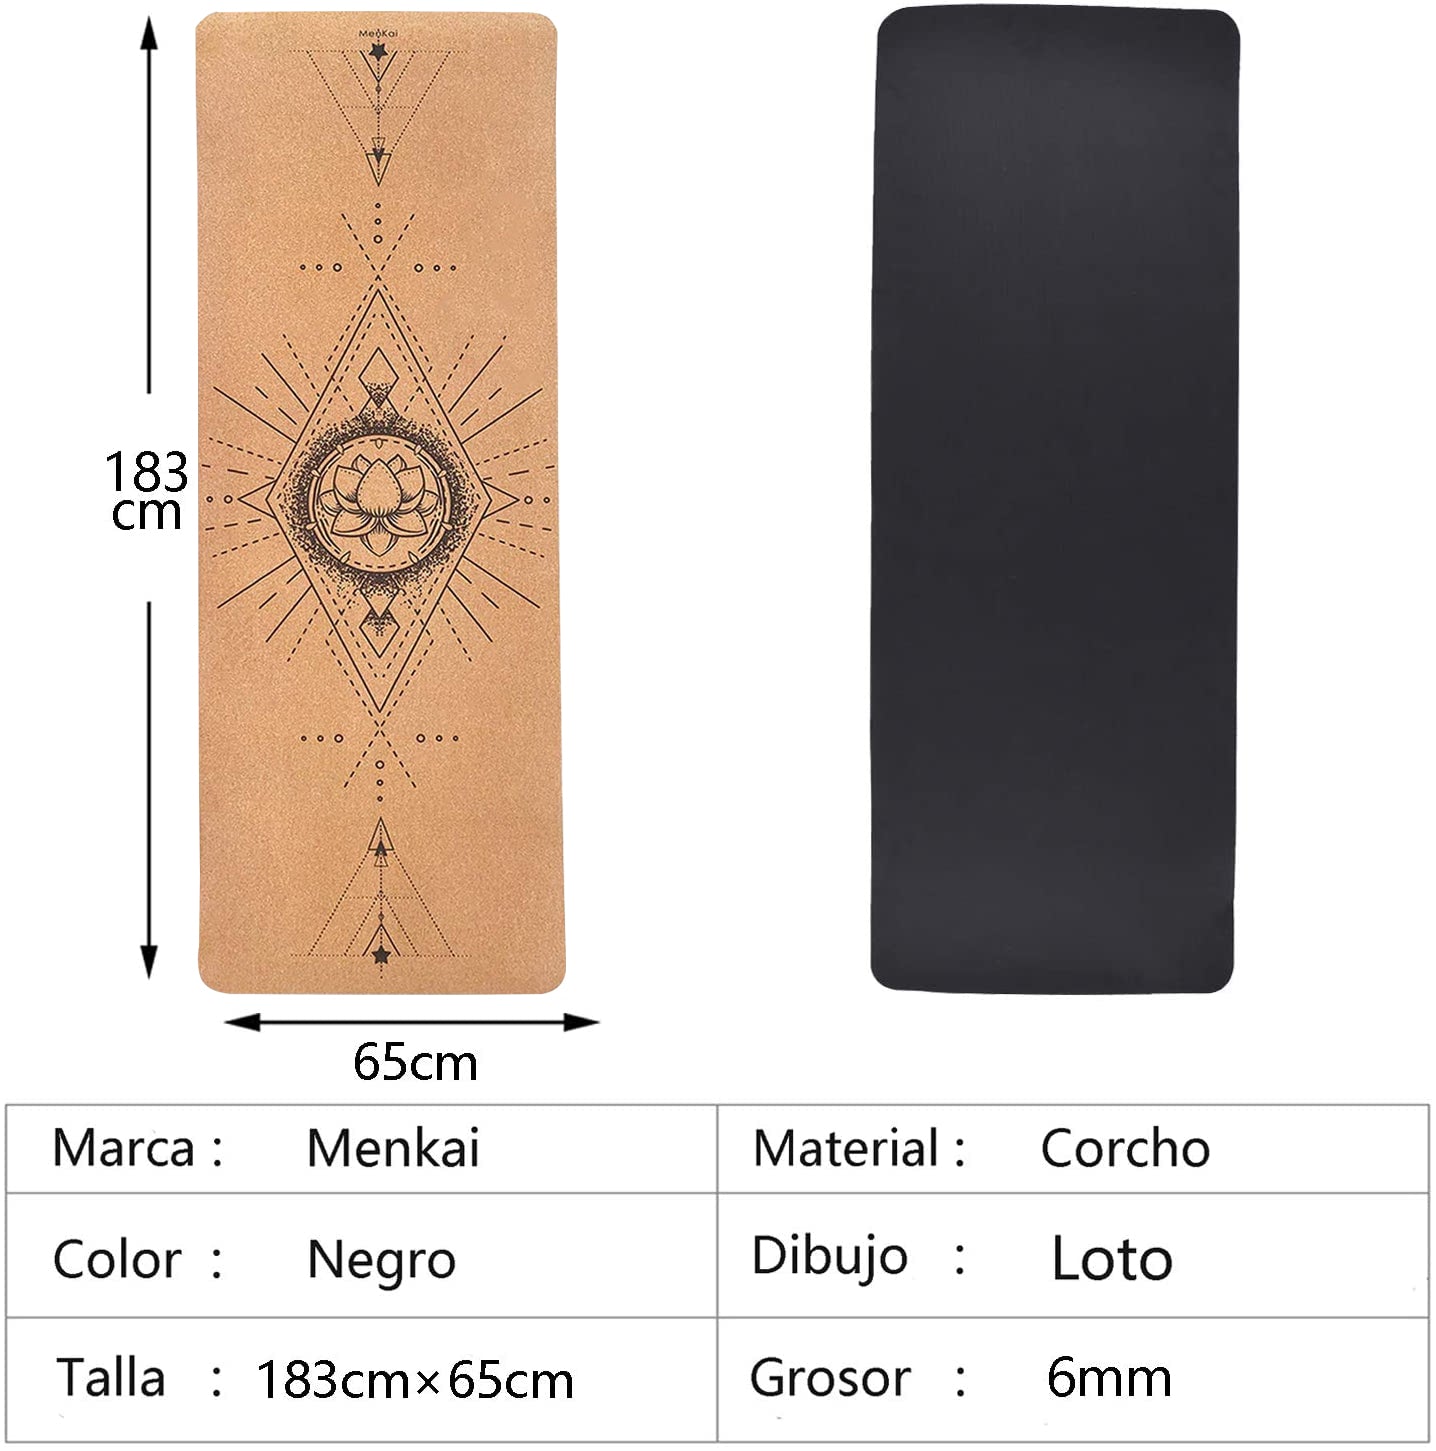 Completely new Yoga mat with minimal transport imperfections 